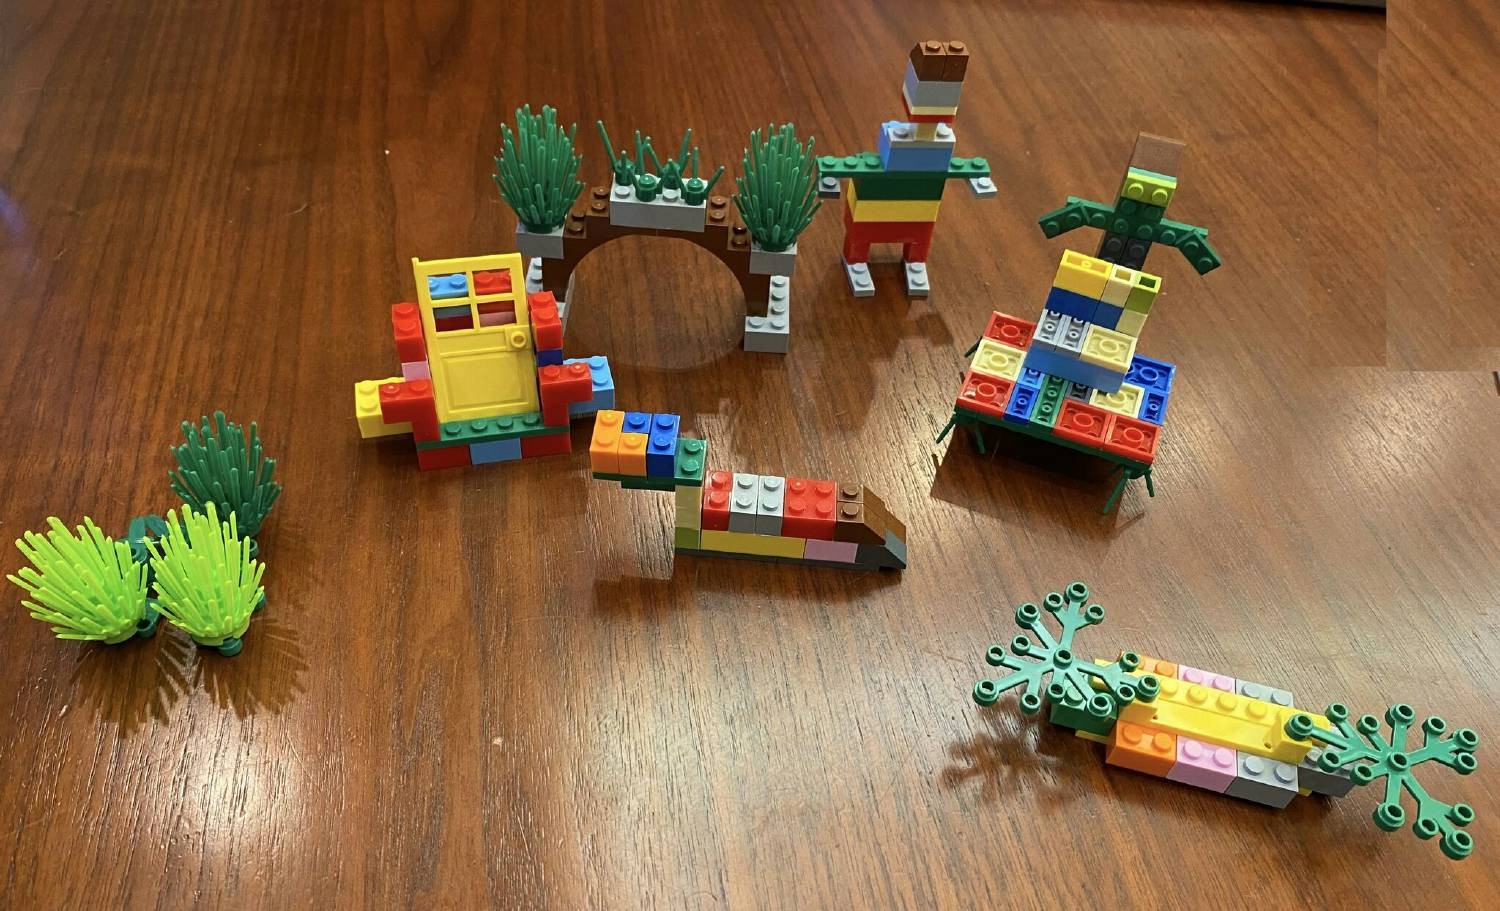 An in-person offsite icebreaker: build an innovation you want to see in real life out of LEGOs.